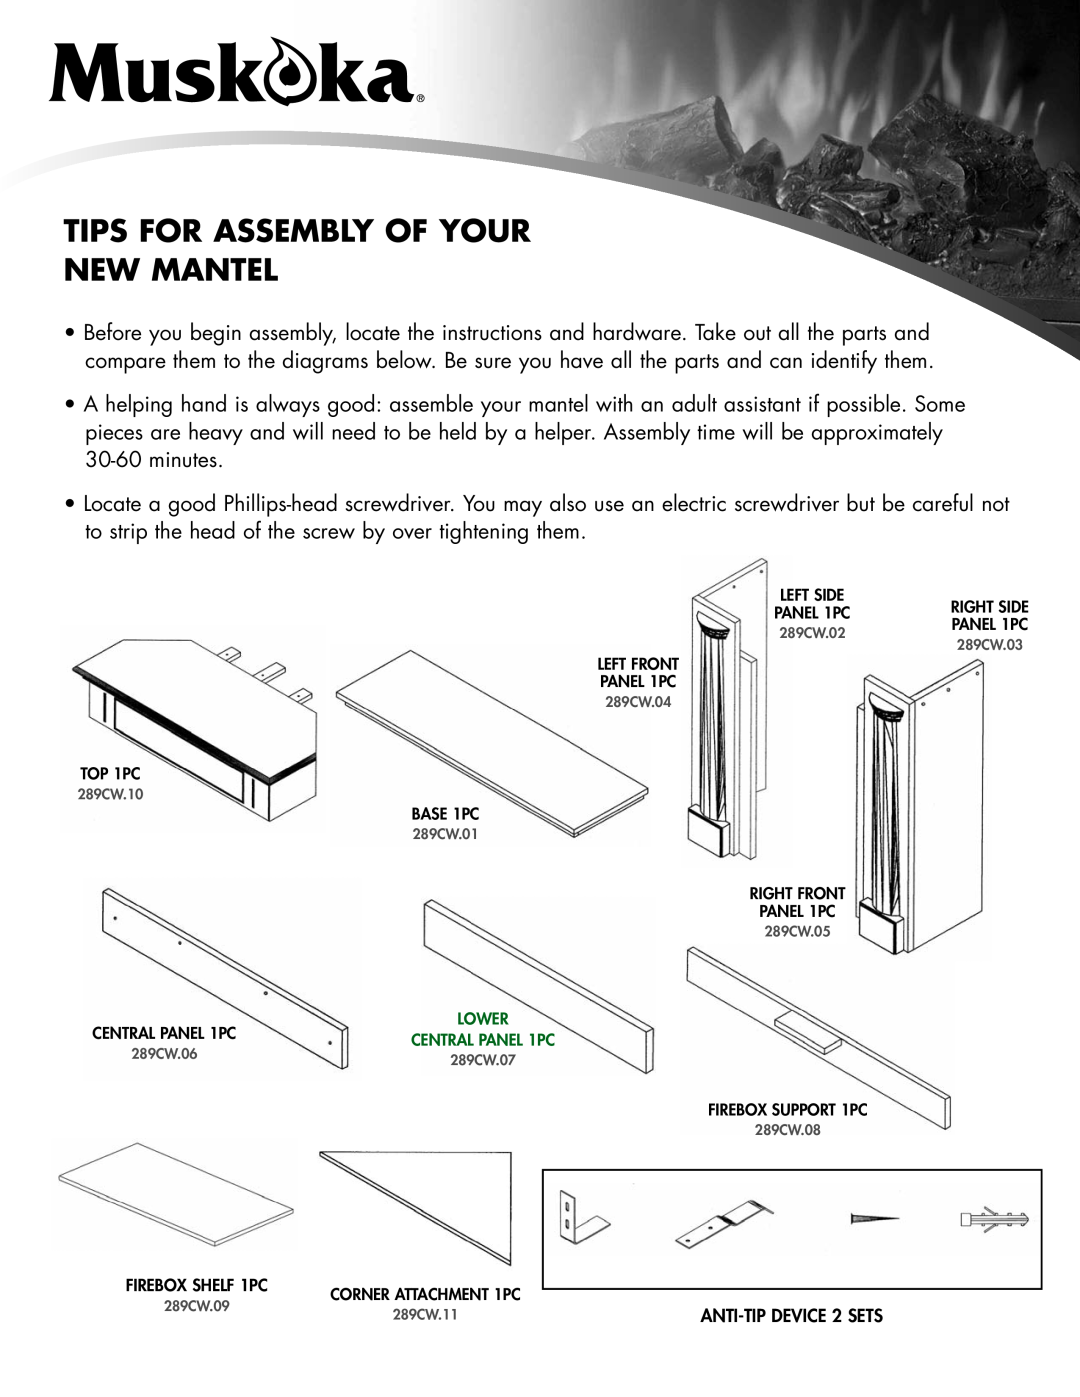 Greenway Home Products MM289CW manual Tips For Assembly Of Your New Mantel, LEFT FRONT PANEL 1PC, TOP 1PC, BASE 1PC 